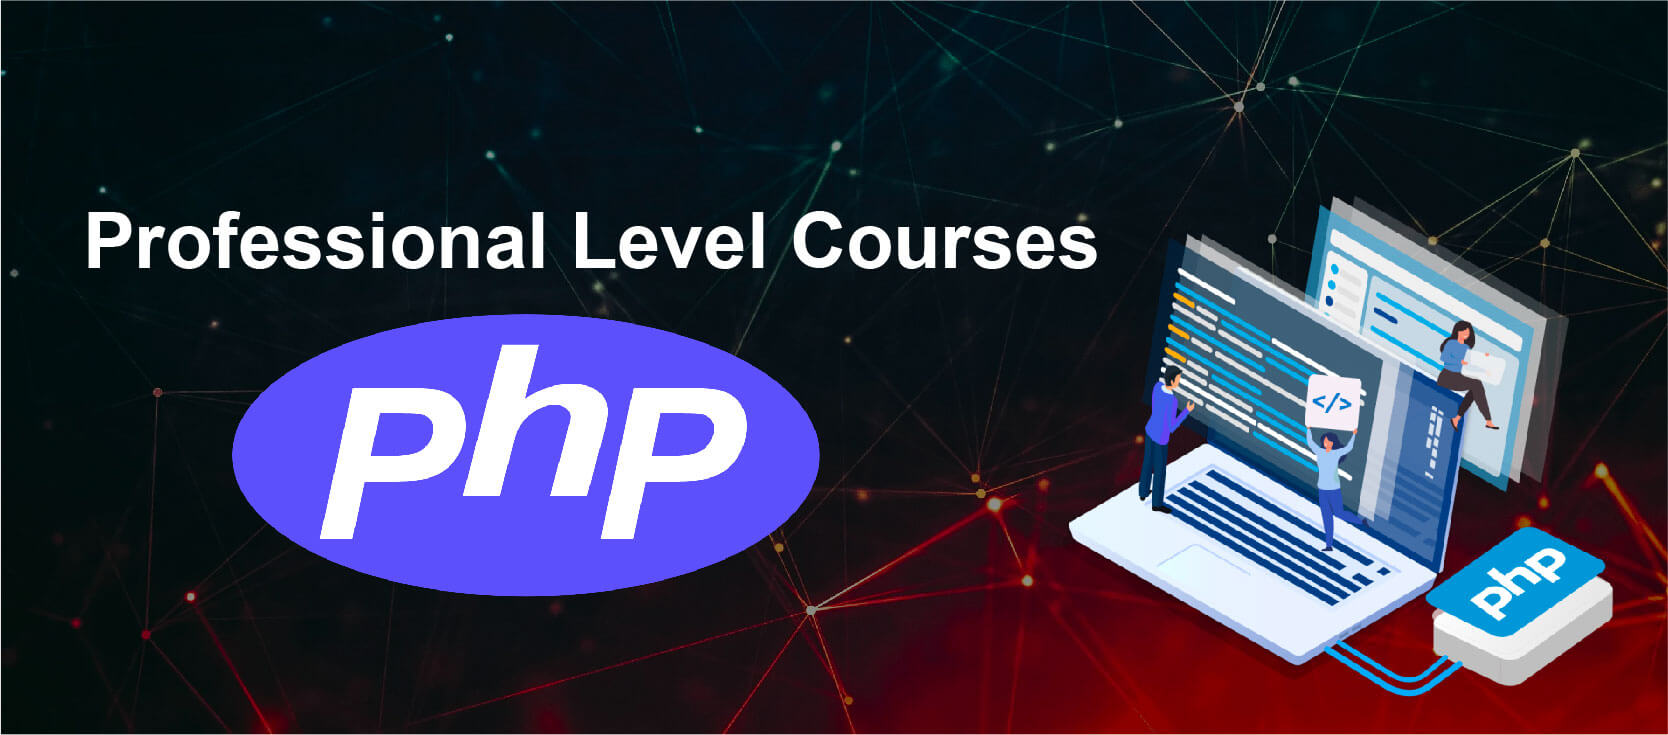 Professional Level Course in PHP